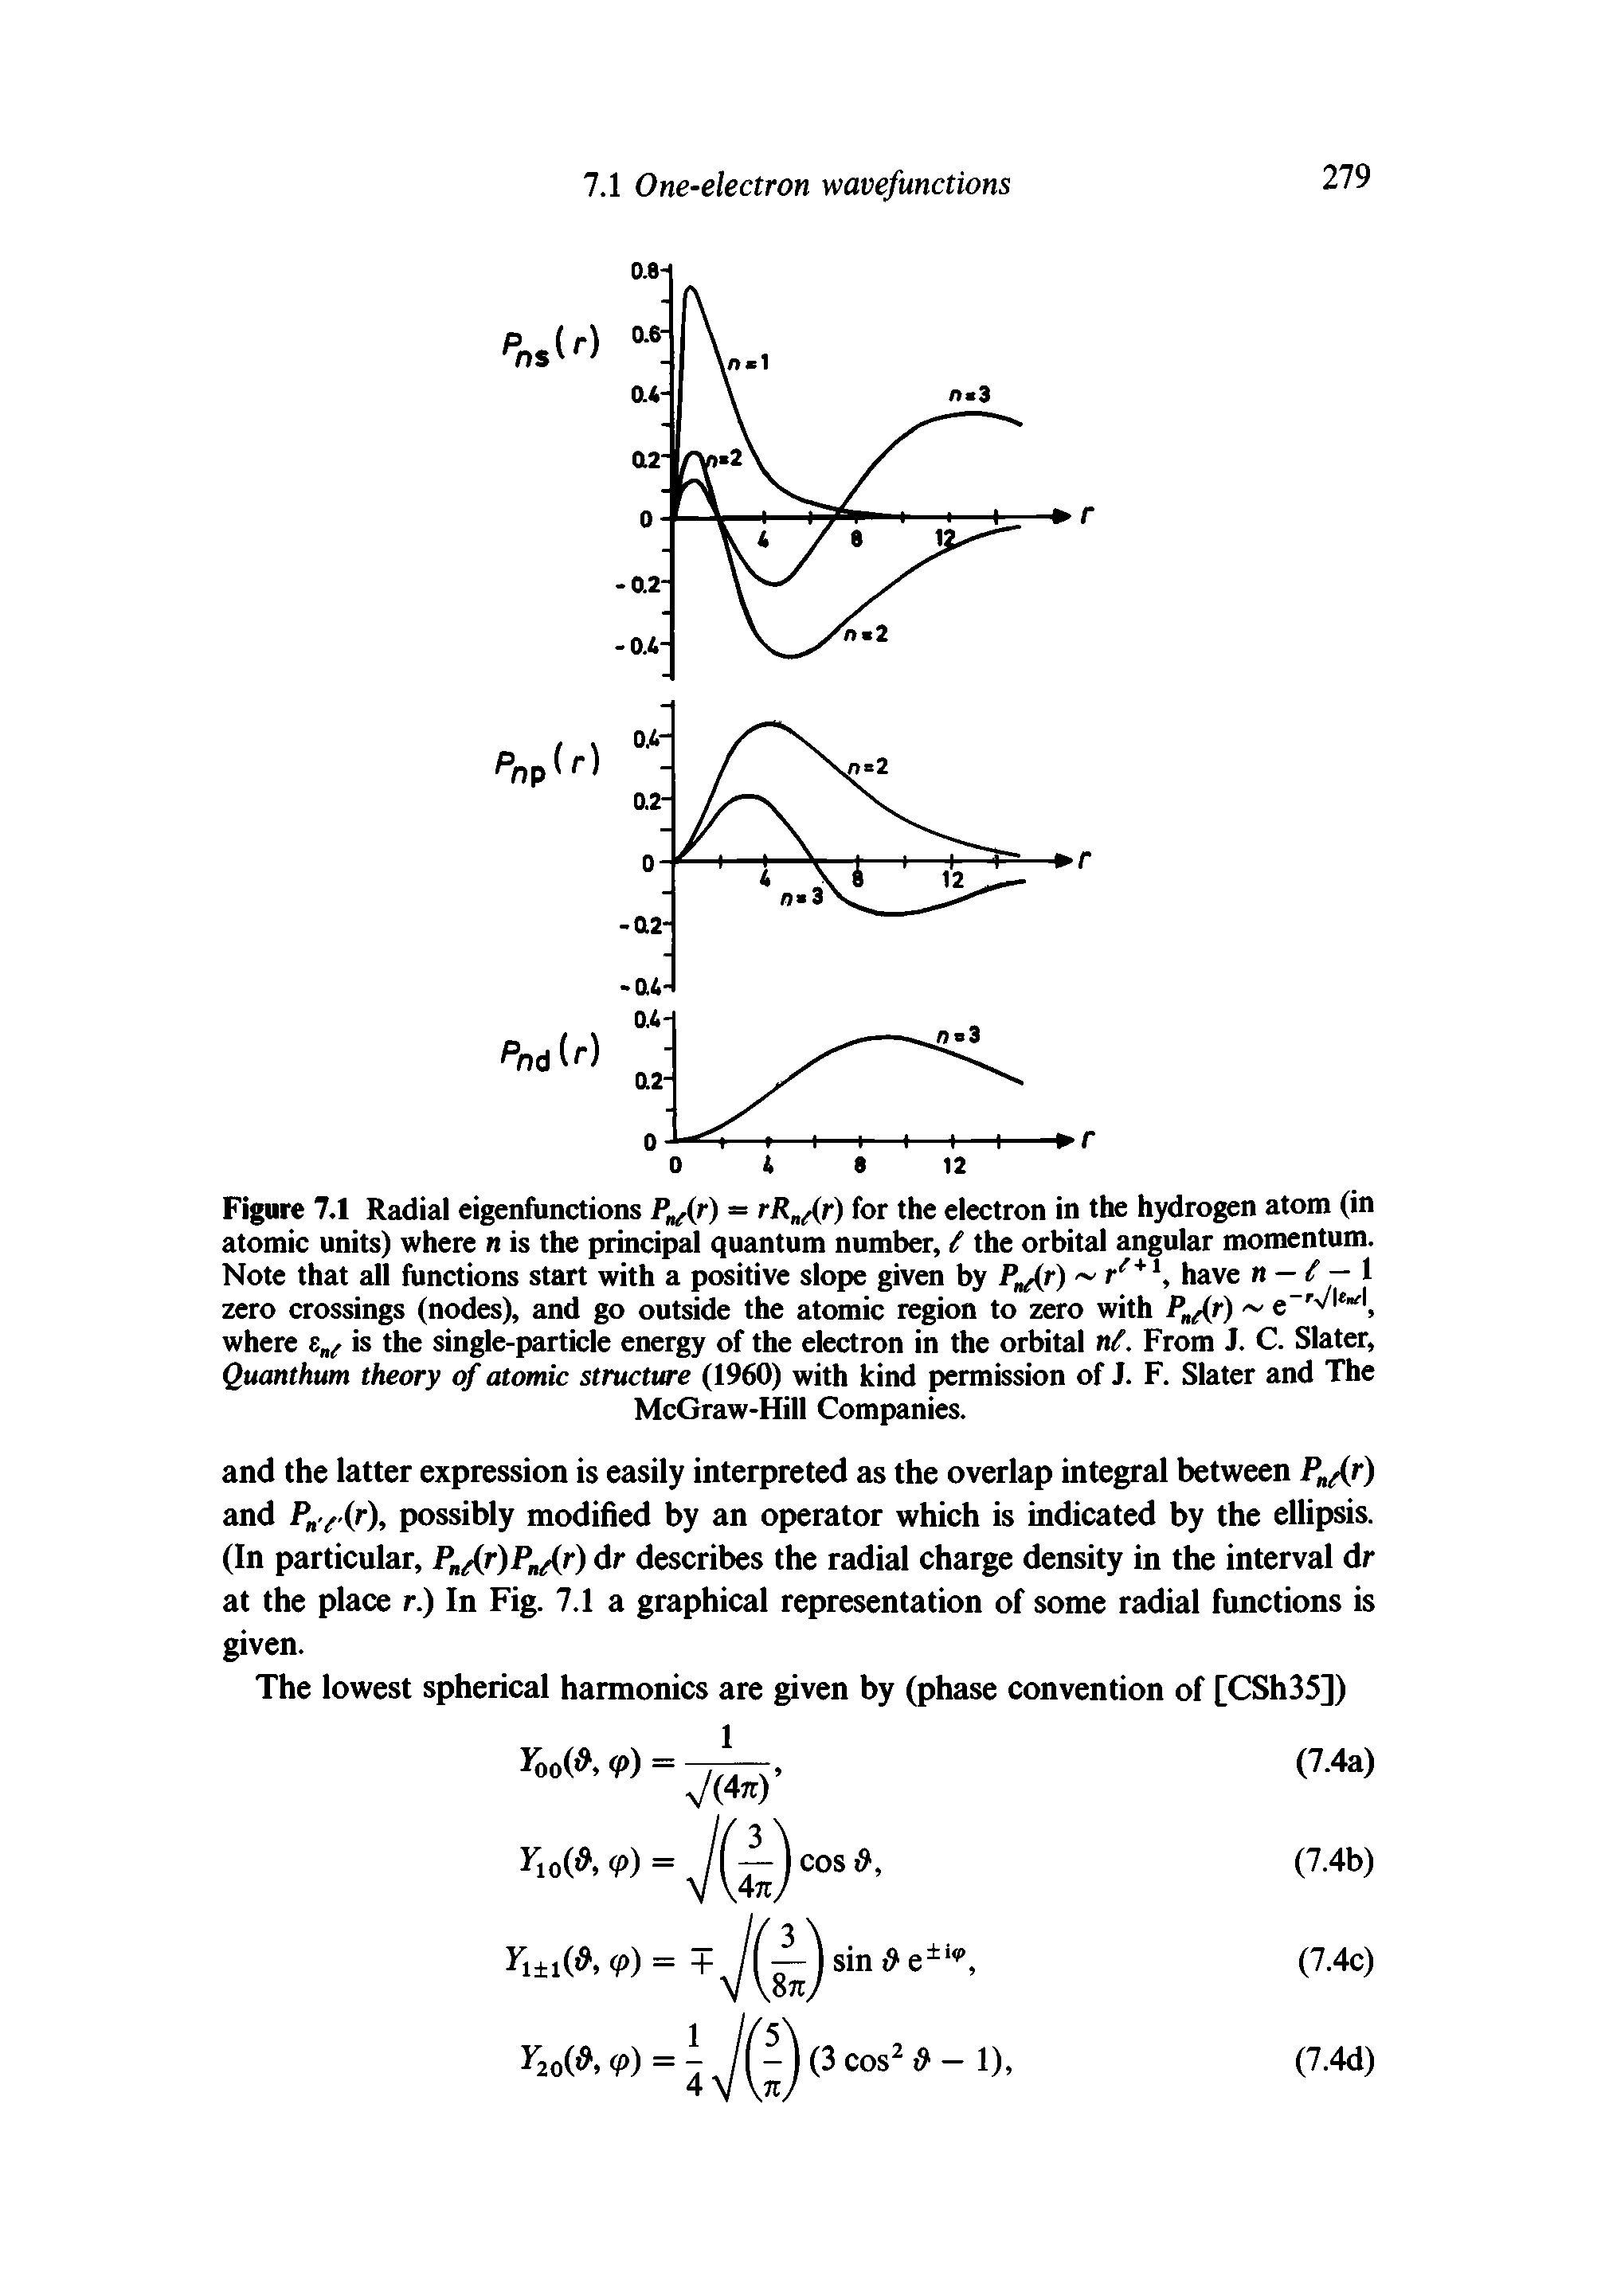 Figure 7.1 Radial eigenfunctions Pn((r) = rR fr) for the electron in the hydrogen atom (in atomic units) where n is the principal quantum number, <f the orbital angular momentum. Note that all functions start with a positive slope given by P g(r) rf 1, have n — i — 1 zero crossings (nodes), and go outside the atomic region to zero with P Ar) e, l " where tn( is the single-particle energy of the electron in the orbital n<f. From J. C. Slater, Quanthum theory of atomic structure (1960) with kind permission of J. F. Slater and The...